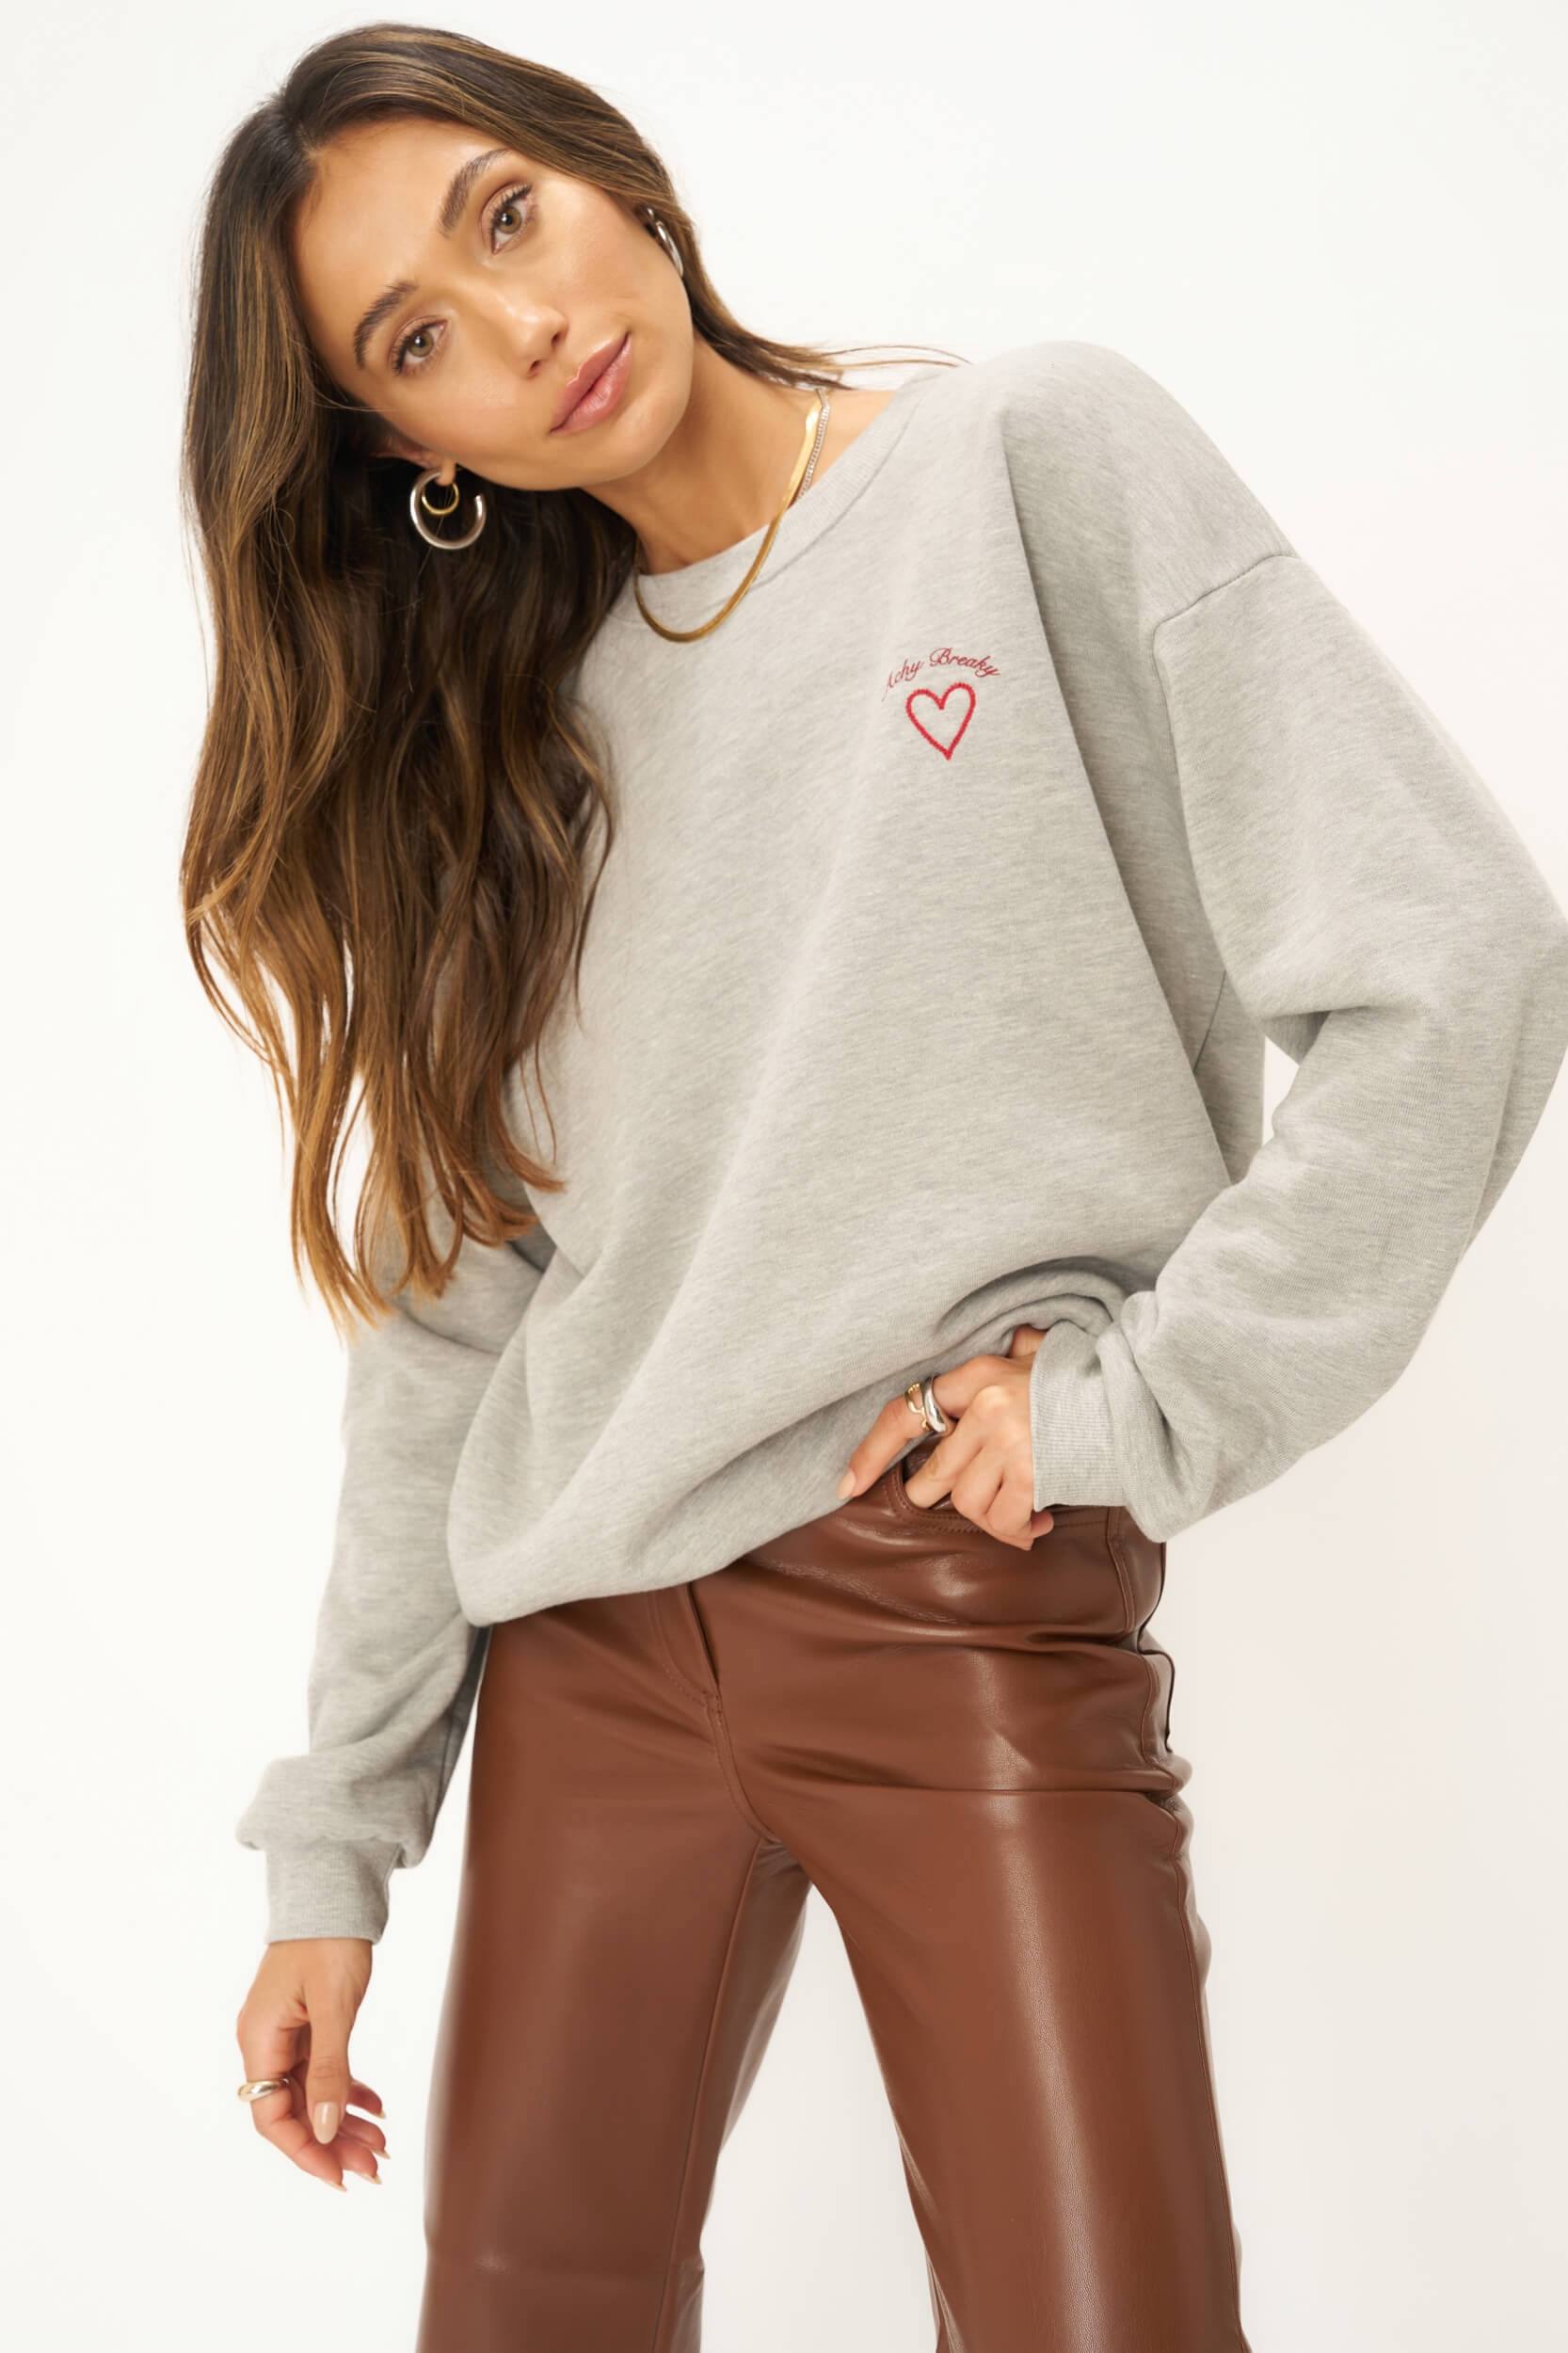 Achy Breaky Embroidered Sweatshirt PROJECT – Grey Heather SOCIAL T 